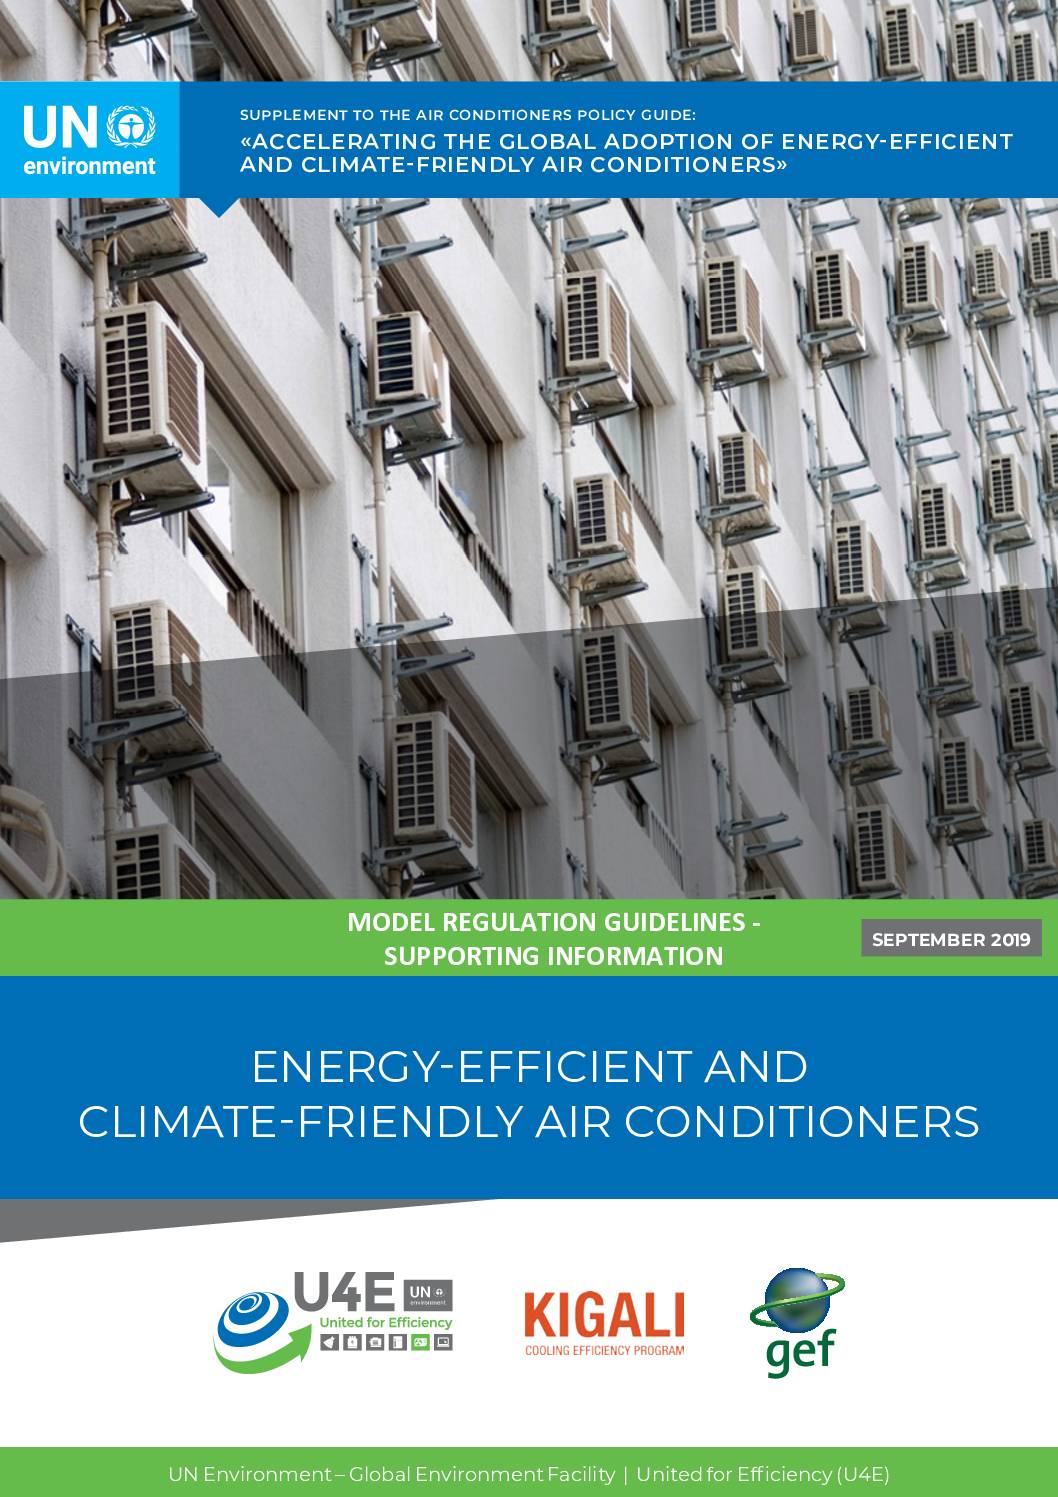 Model Regulation Guidelines Supporting Information For Energy-efficient And Climate-friendly Air Conditioners